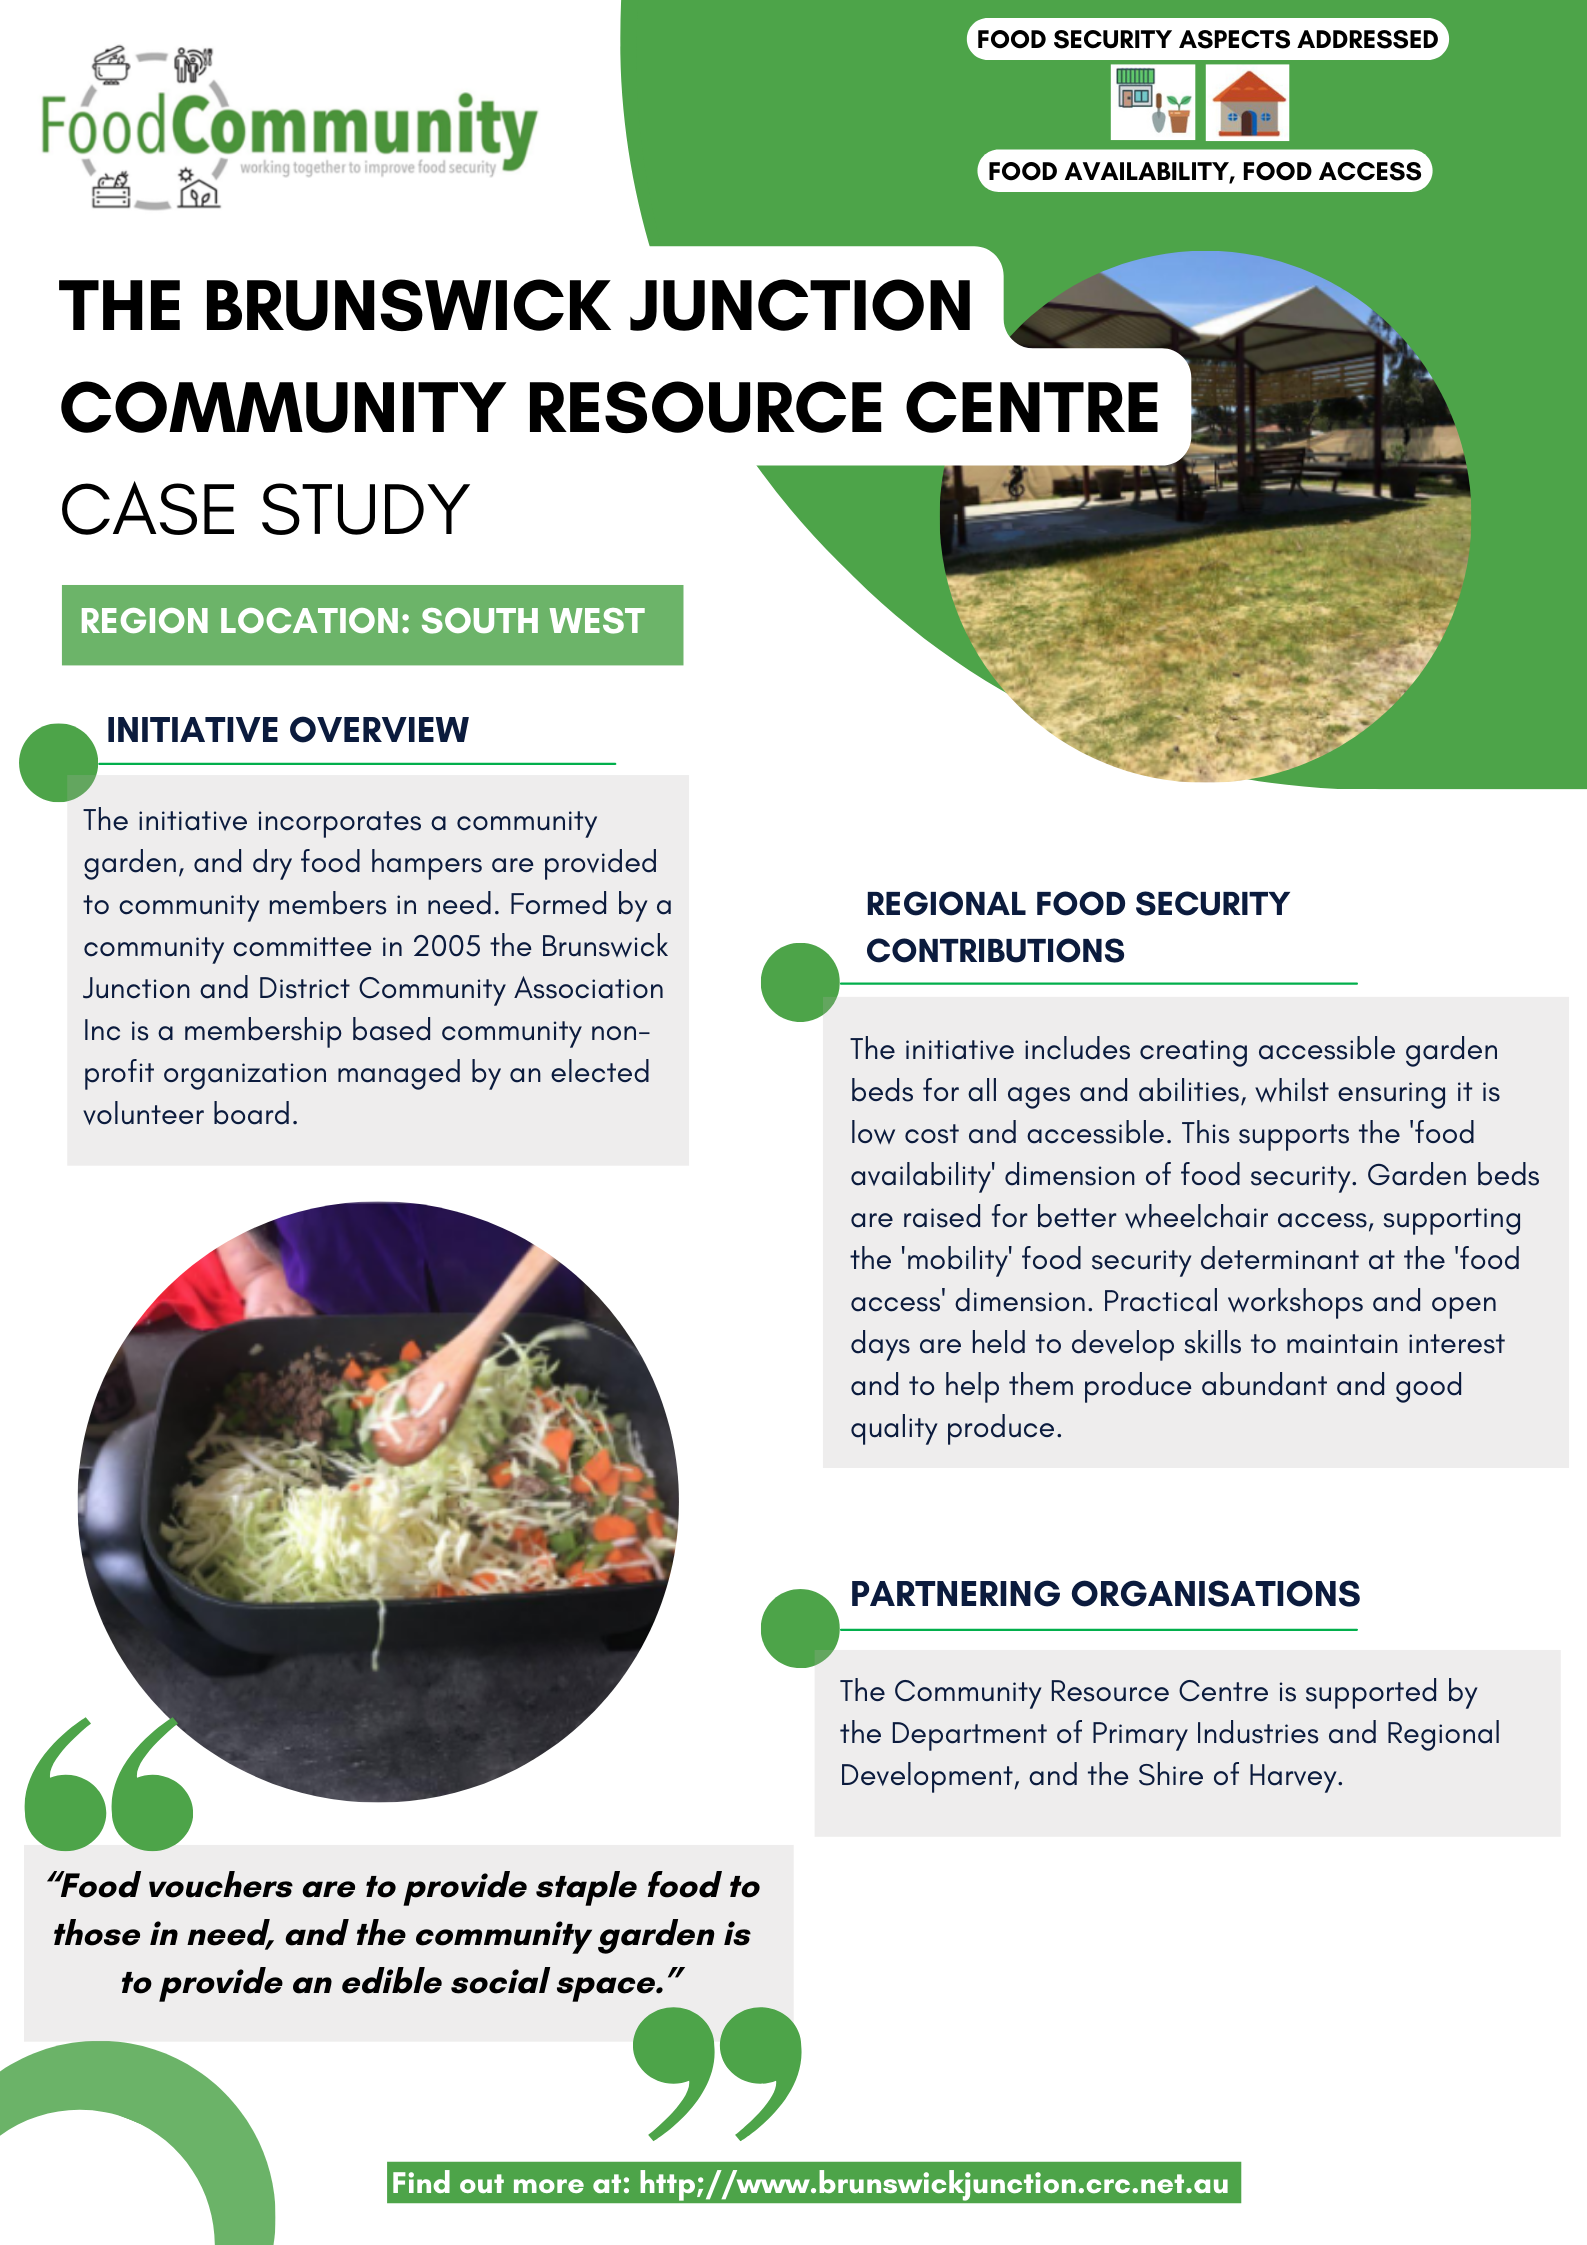 The Brunswick Junction Community Resource Centre